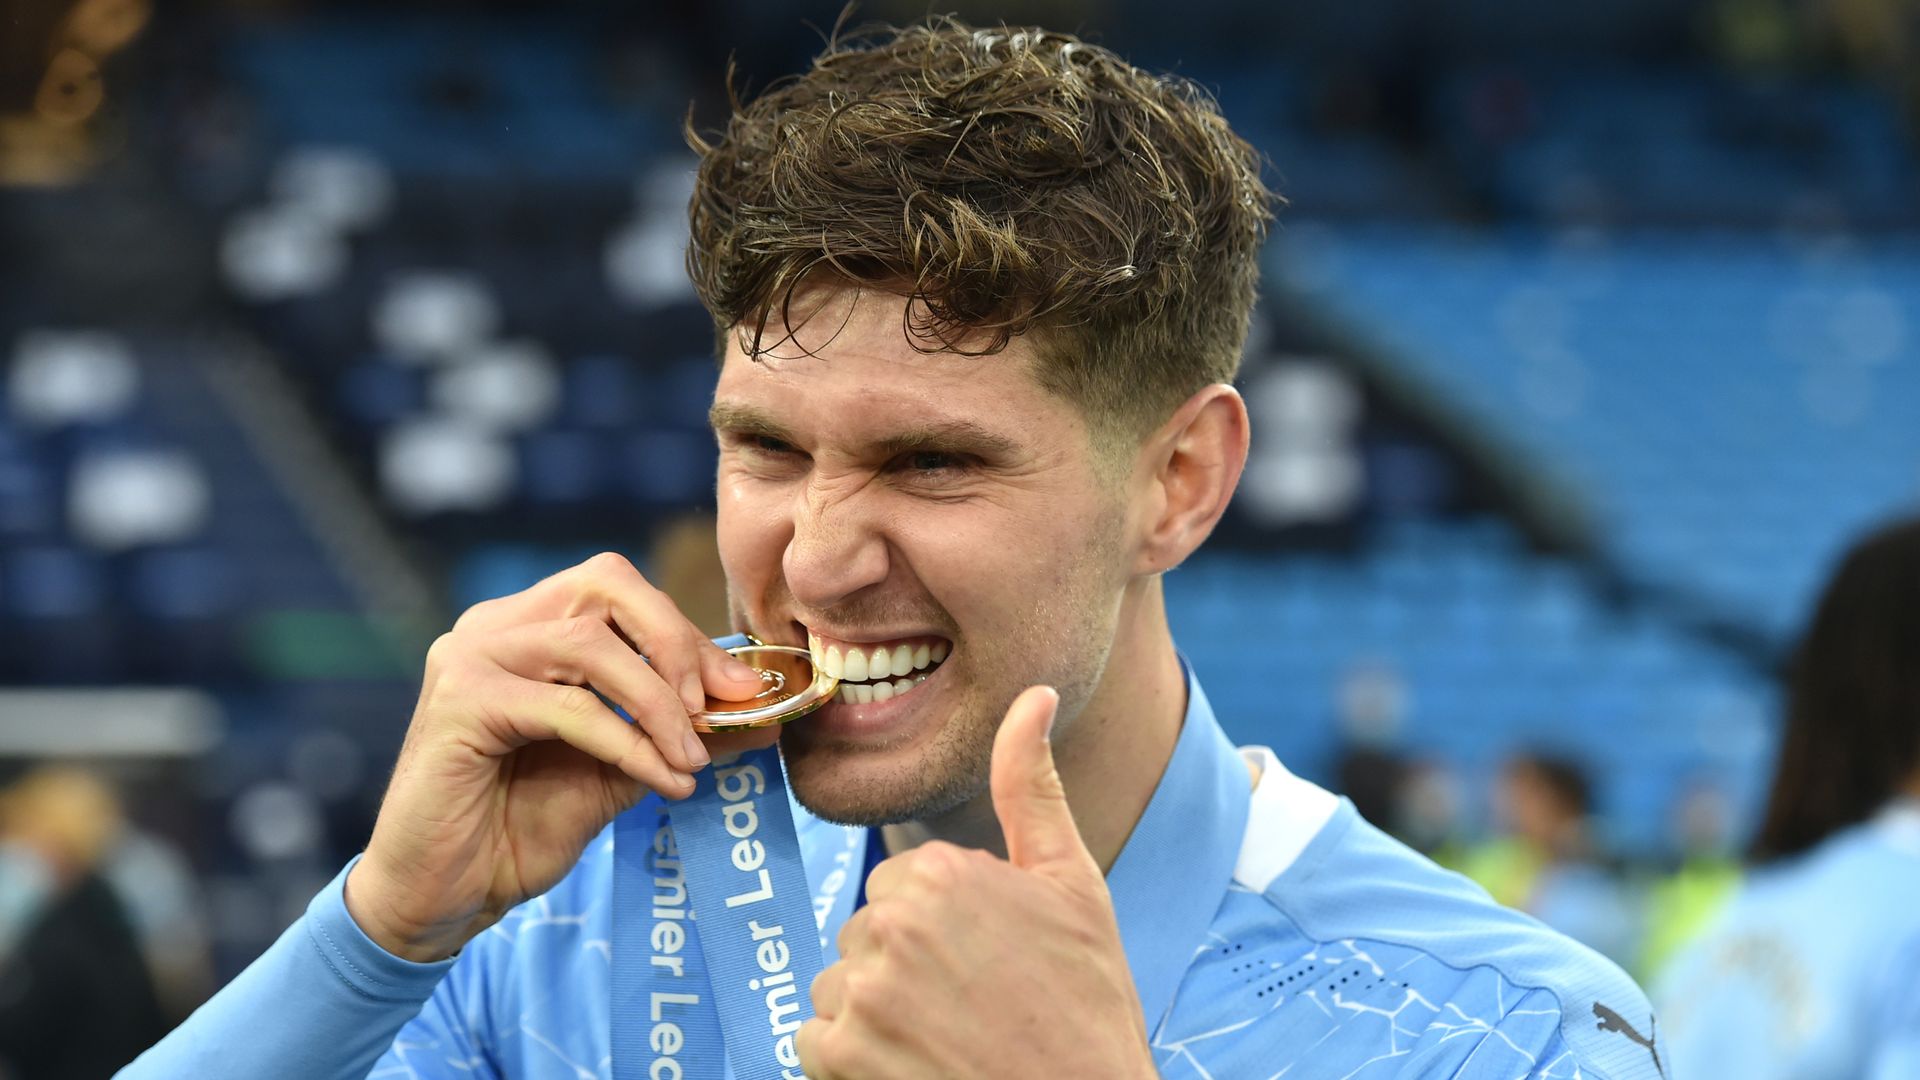 Stones signs contract extension at Man City